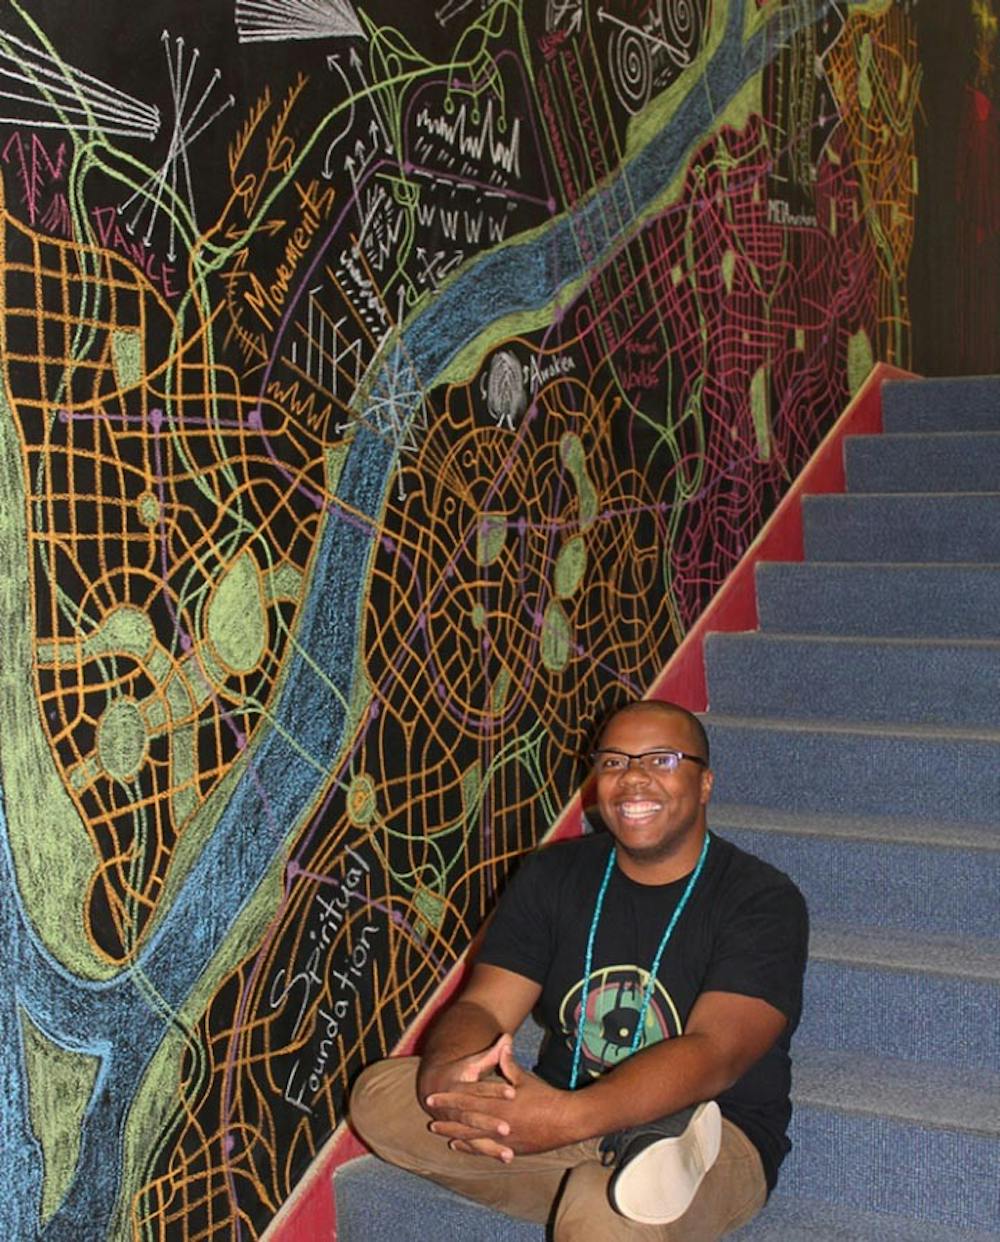 <p>Michael Dantzler sits next to his mural, “Transcend Map,” which is a temporary mural he made in October 2016 for the University of South Carolina School of Music’s library.</p>